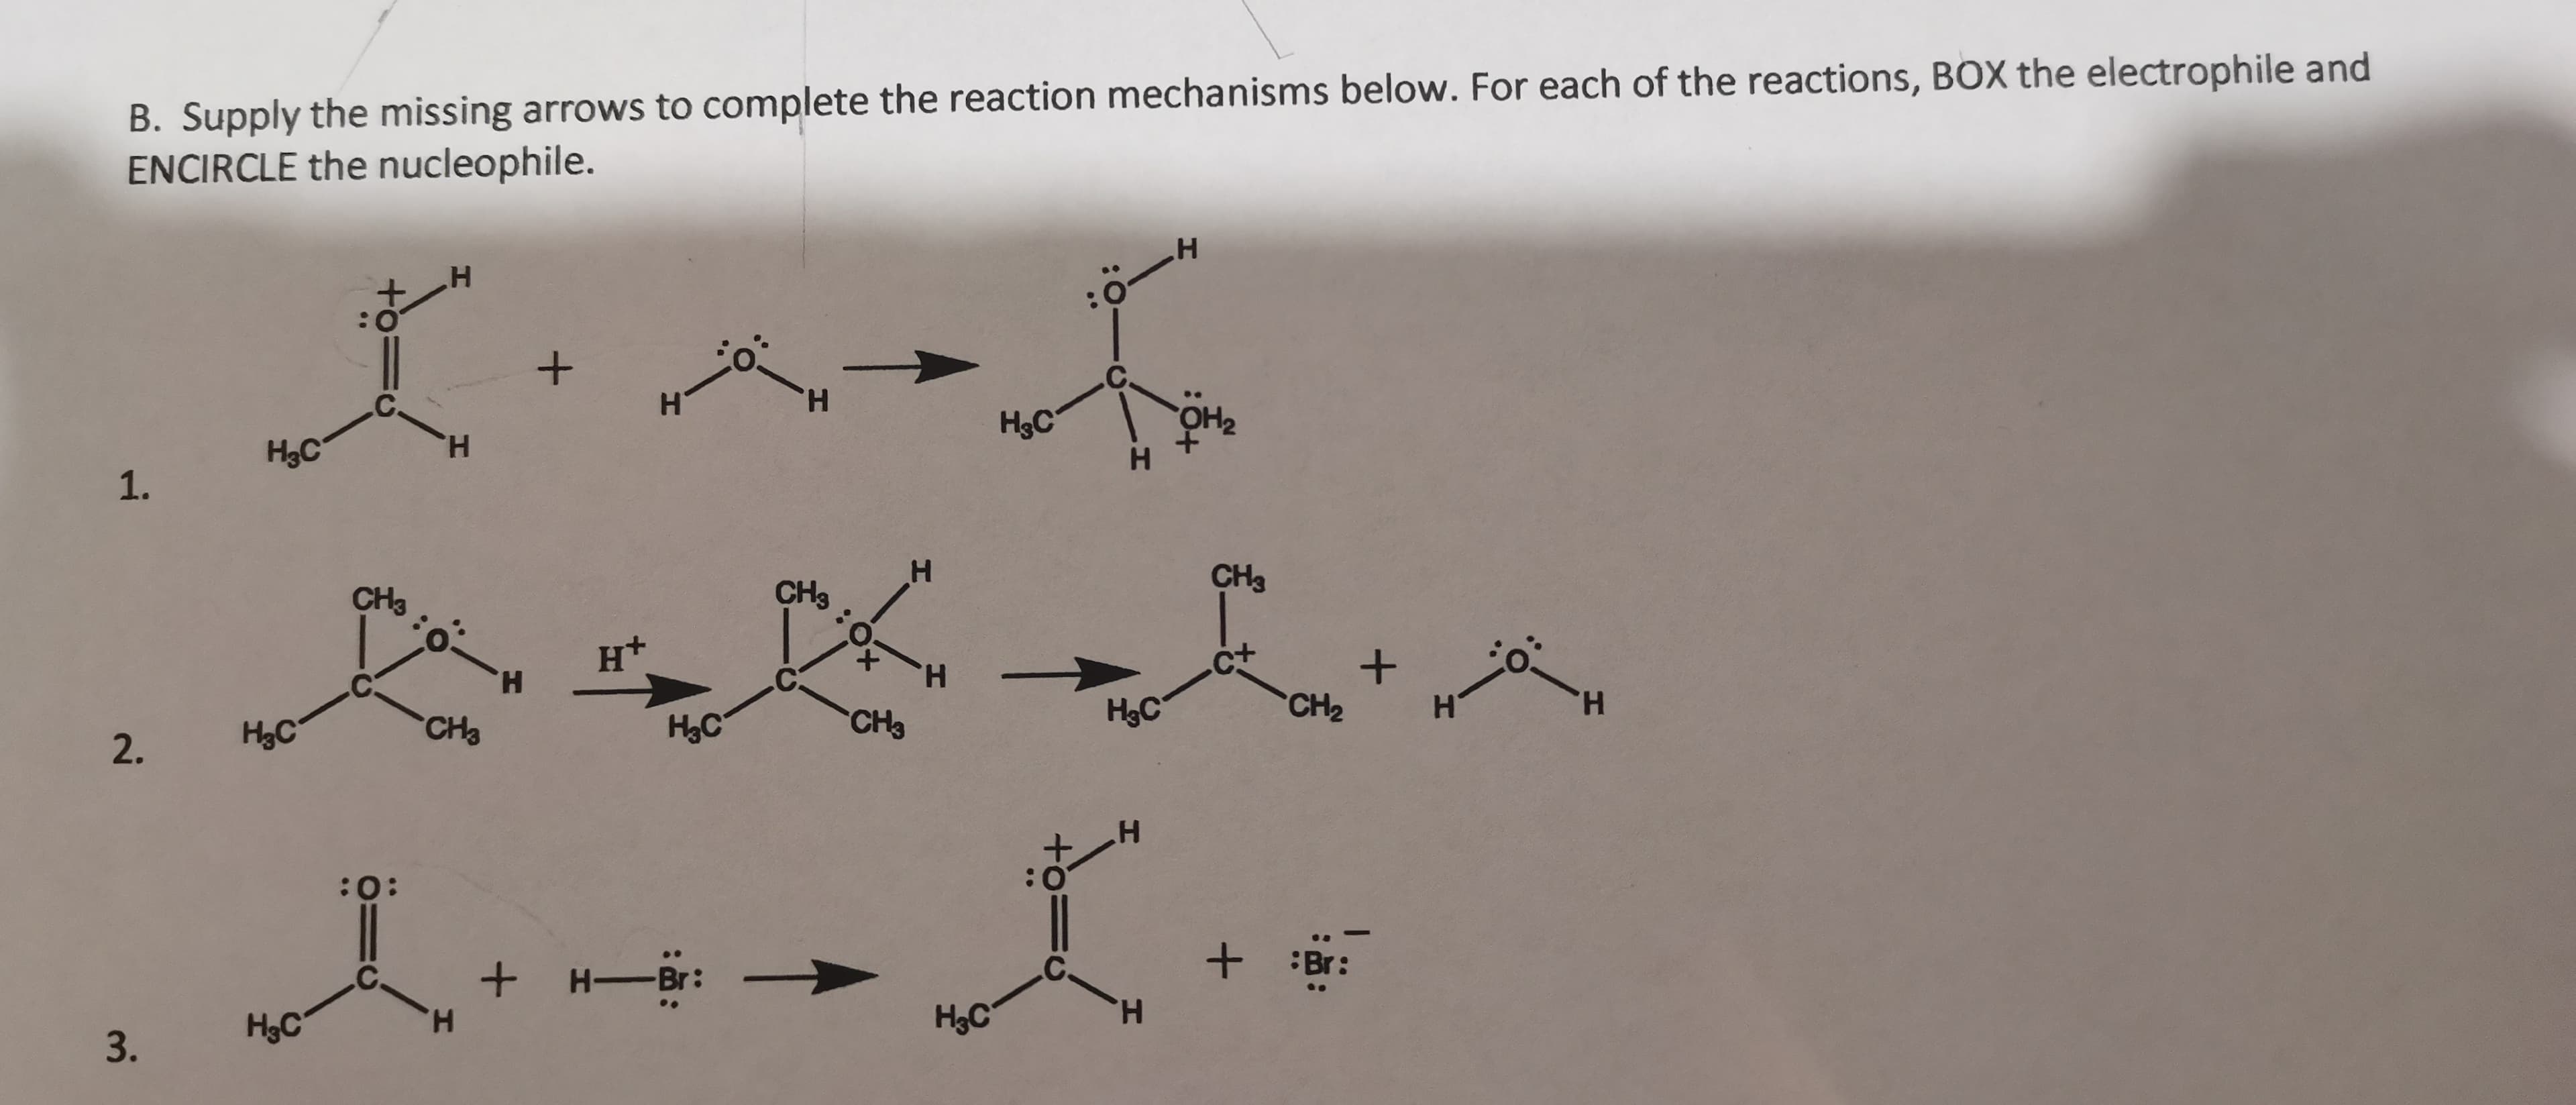 1.
B. Supply the missing arrows to complete the reaction mechanisms below. For each of the reactions, BOX the electrophile and
ENCIRCLE the nucleophile.
H3C
H.
H.
H3C
H.
CH3
CH3
H3C
H.
CHa
2.
H2C
HgC
CH2
H.
:0:
:-H +
H3C
3.
+ :Br:
H.
